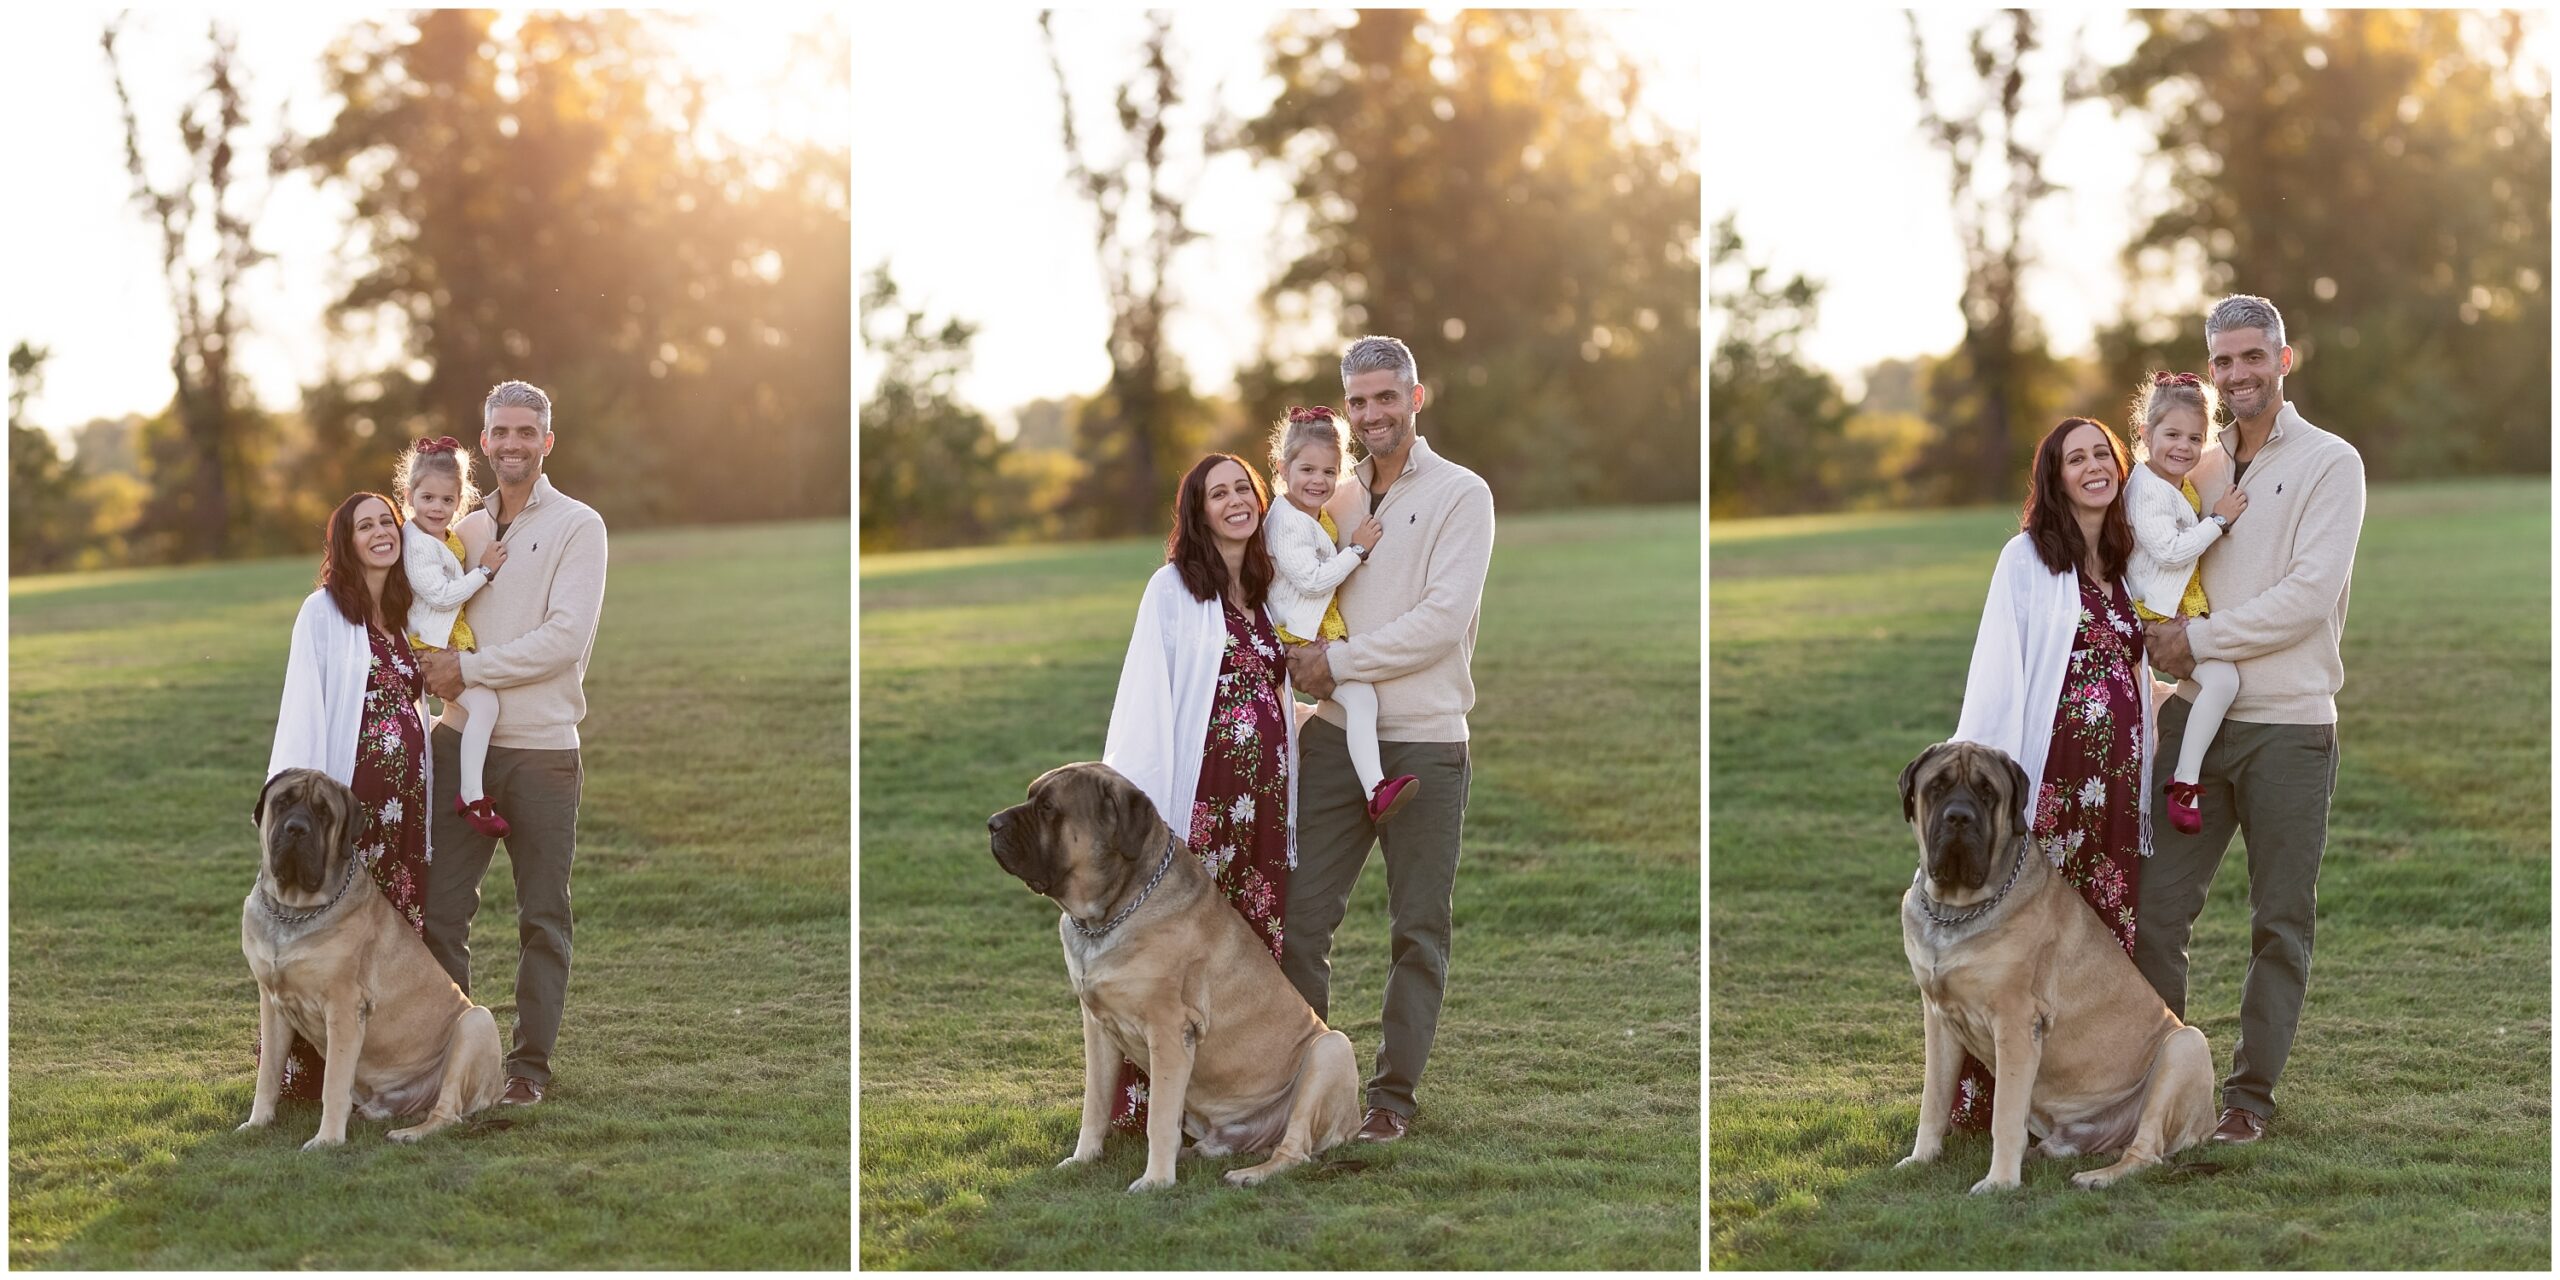 Fall Boyce Park Maternity Session in Plum PA Photographed by Plum and Pittsburgh Family & Maternity Photographer Acevedo Weddings